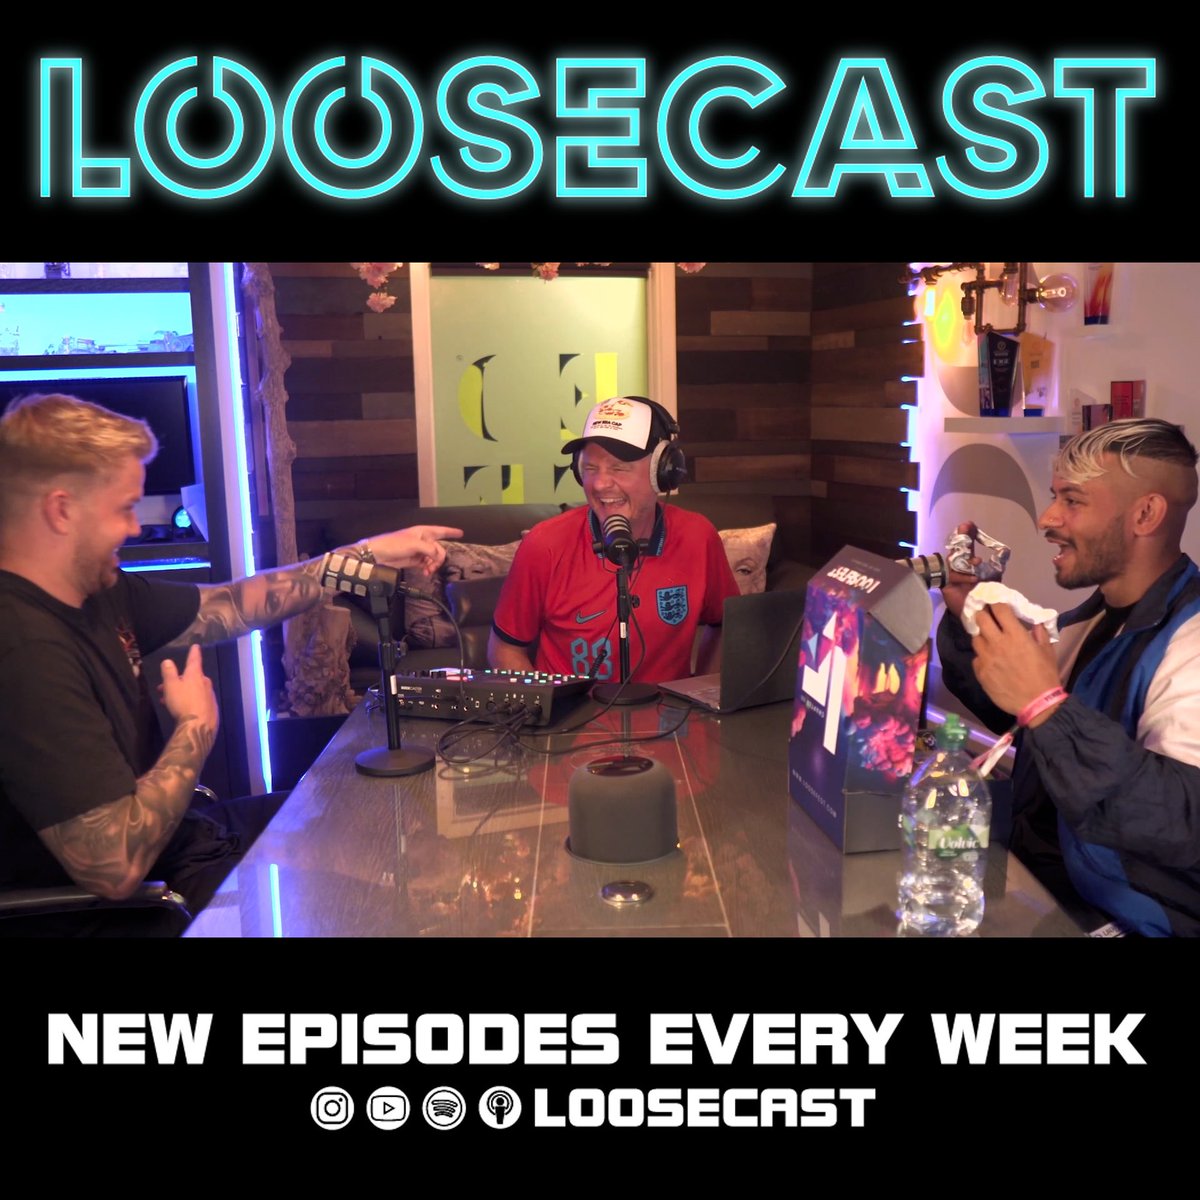 LooseCast my new podcast! Episode 1 with Schak is out now 🚨